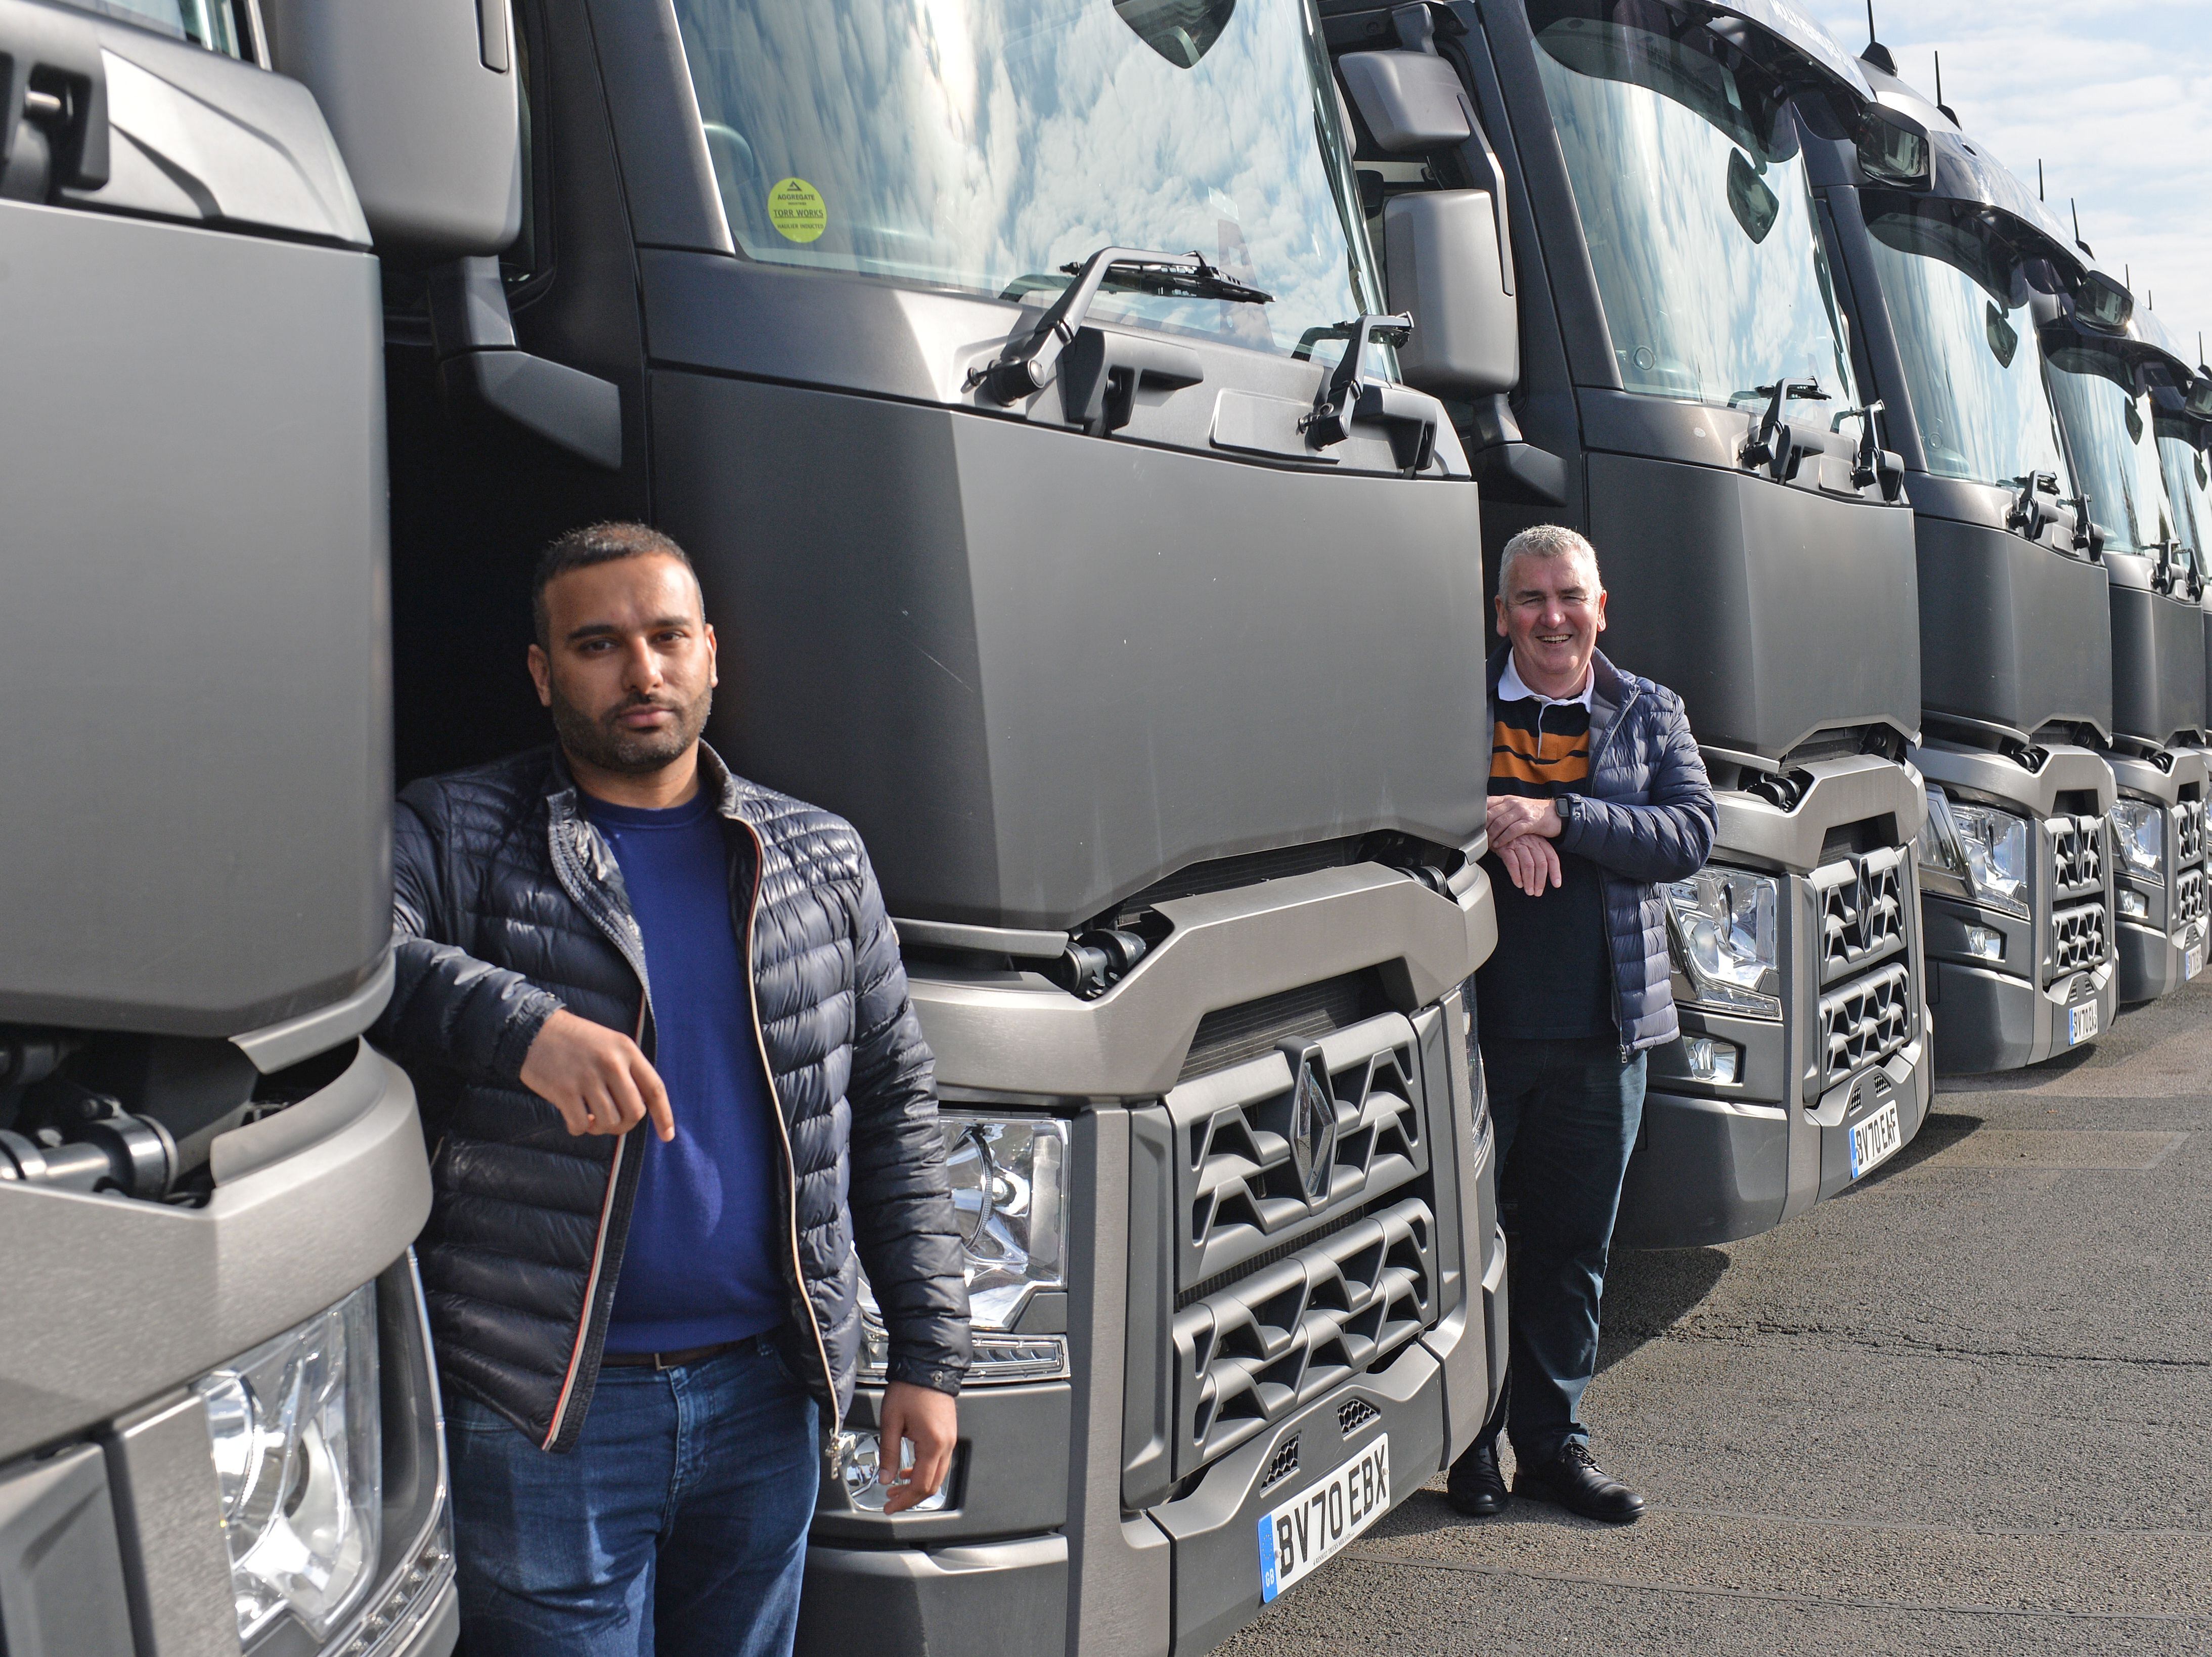 Haulage company boss calls for Government support amid rising fuel prices